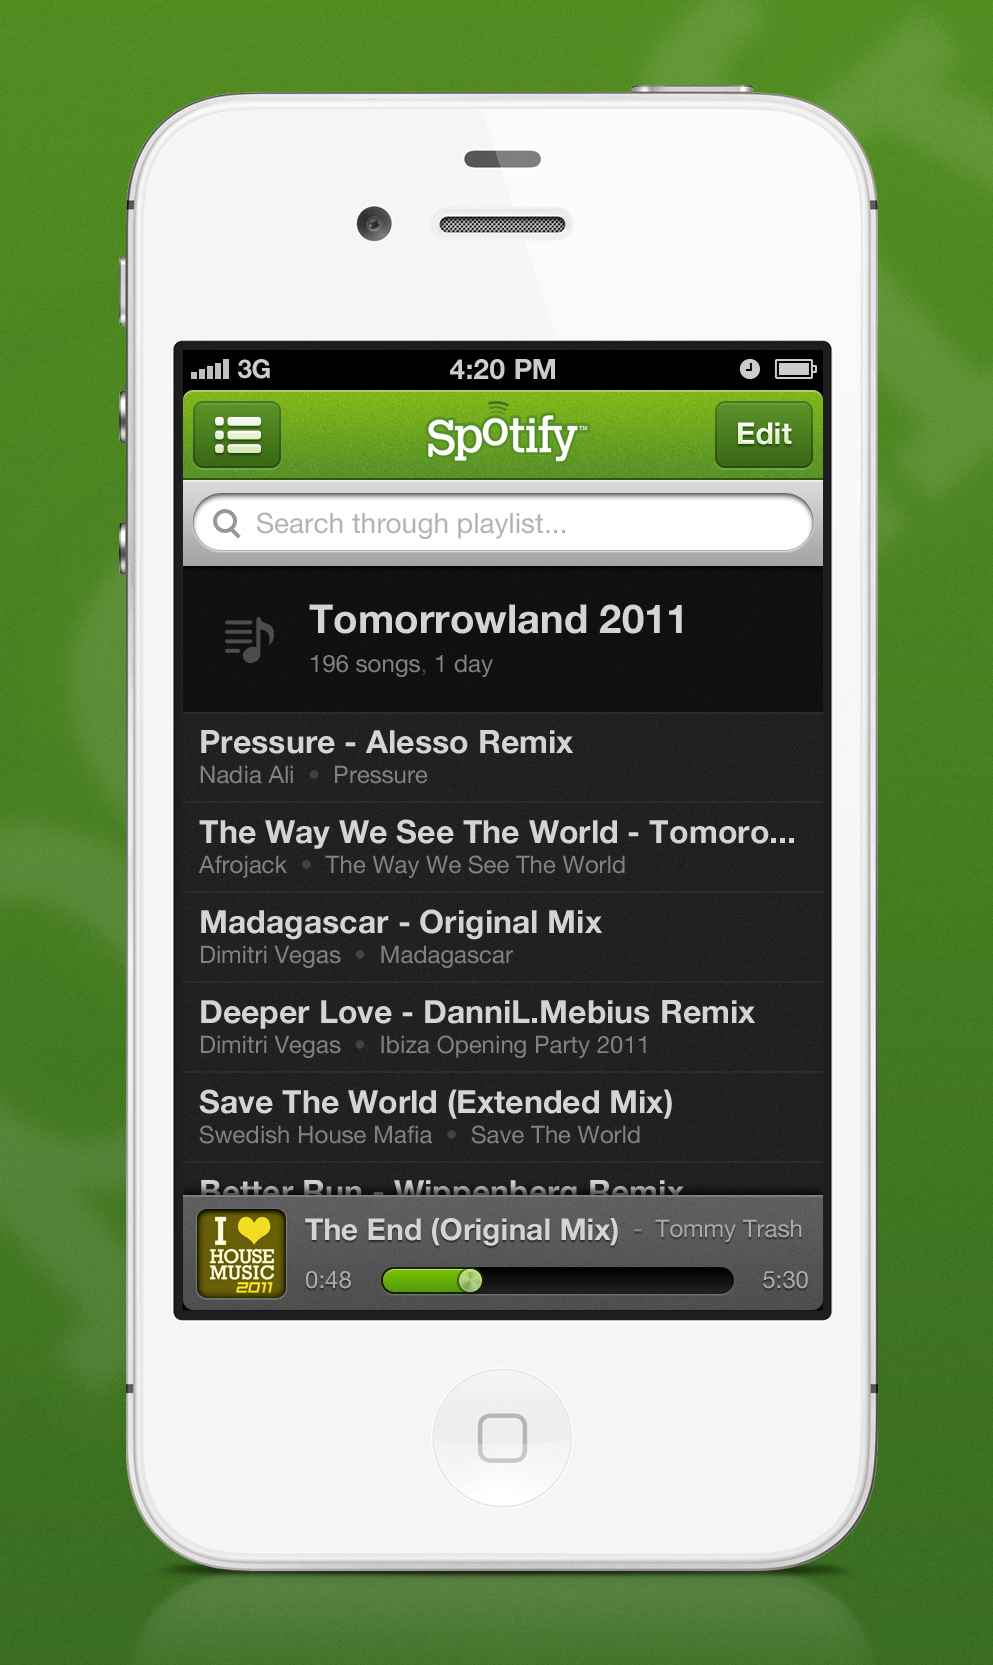 Free spotify iphone app downloads